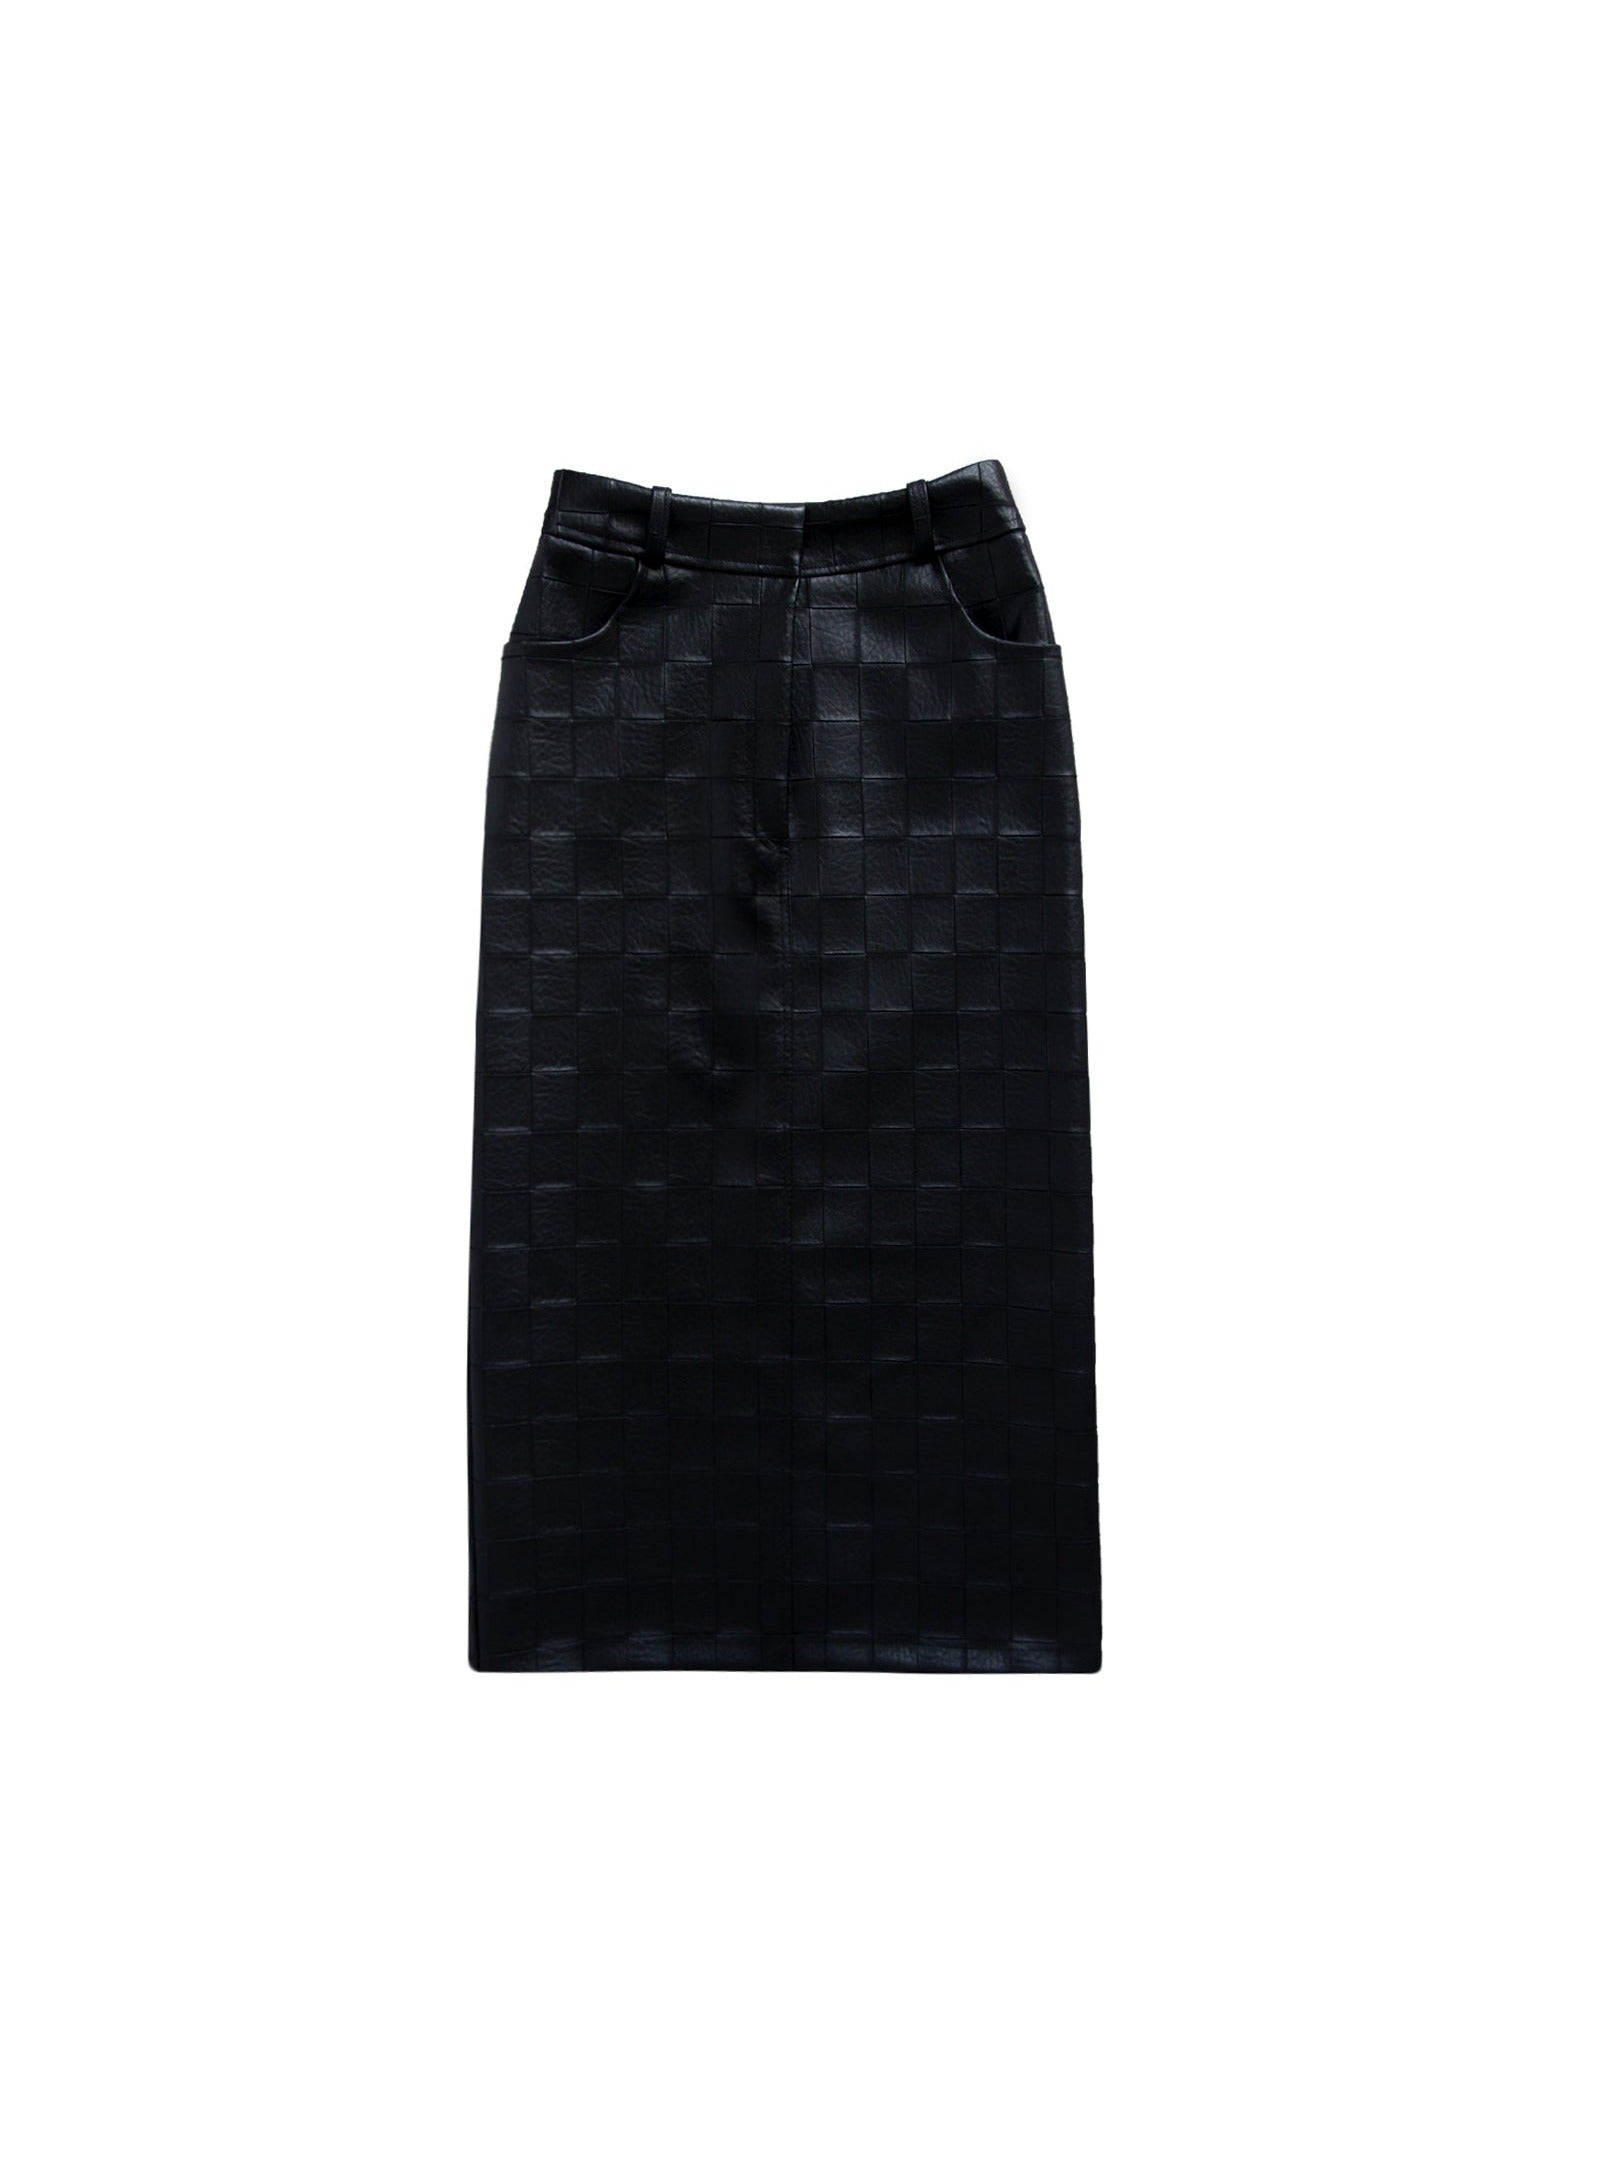 Black check embossed leather pencil skirt.